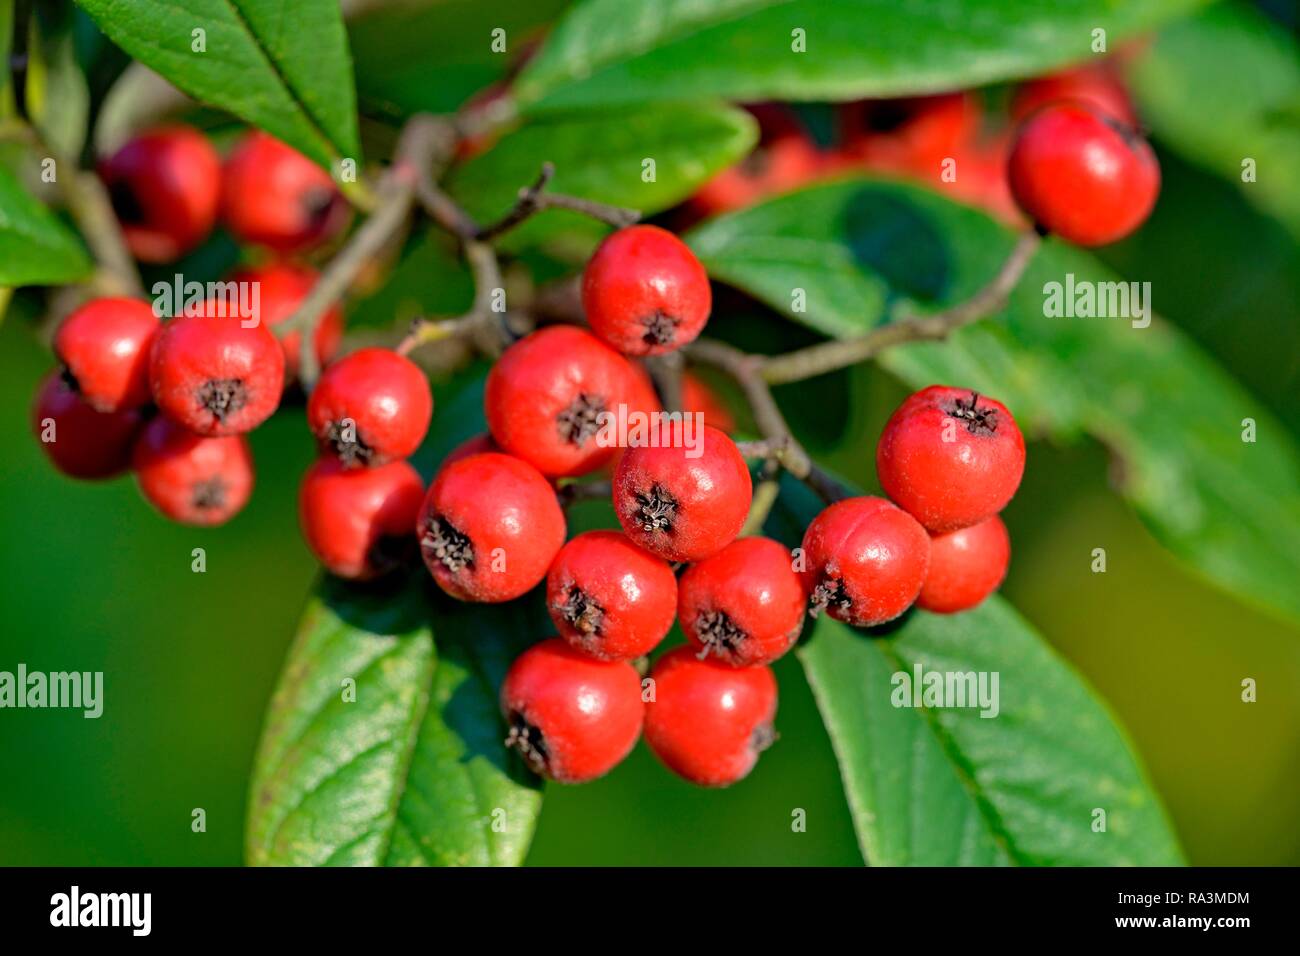 Willow-leaved cotoneaster (Cotoneaster salicifolius flococcus), branch with red fruits, North Rhine-Westphalia, Germany Stock Photo